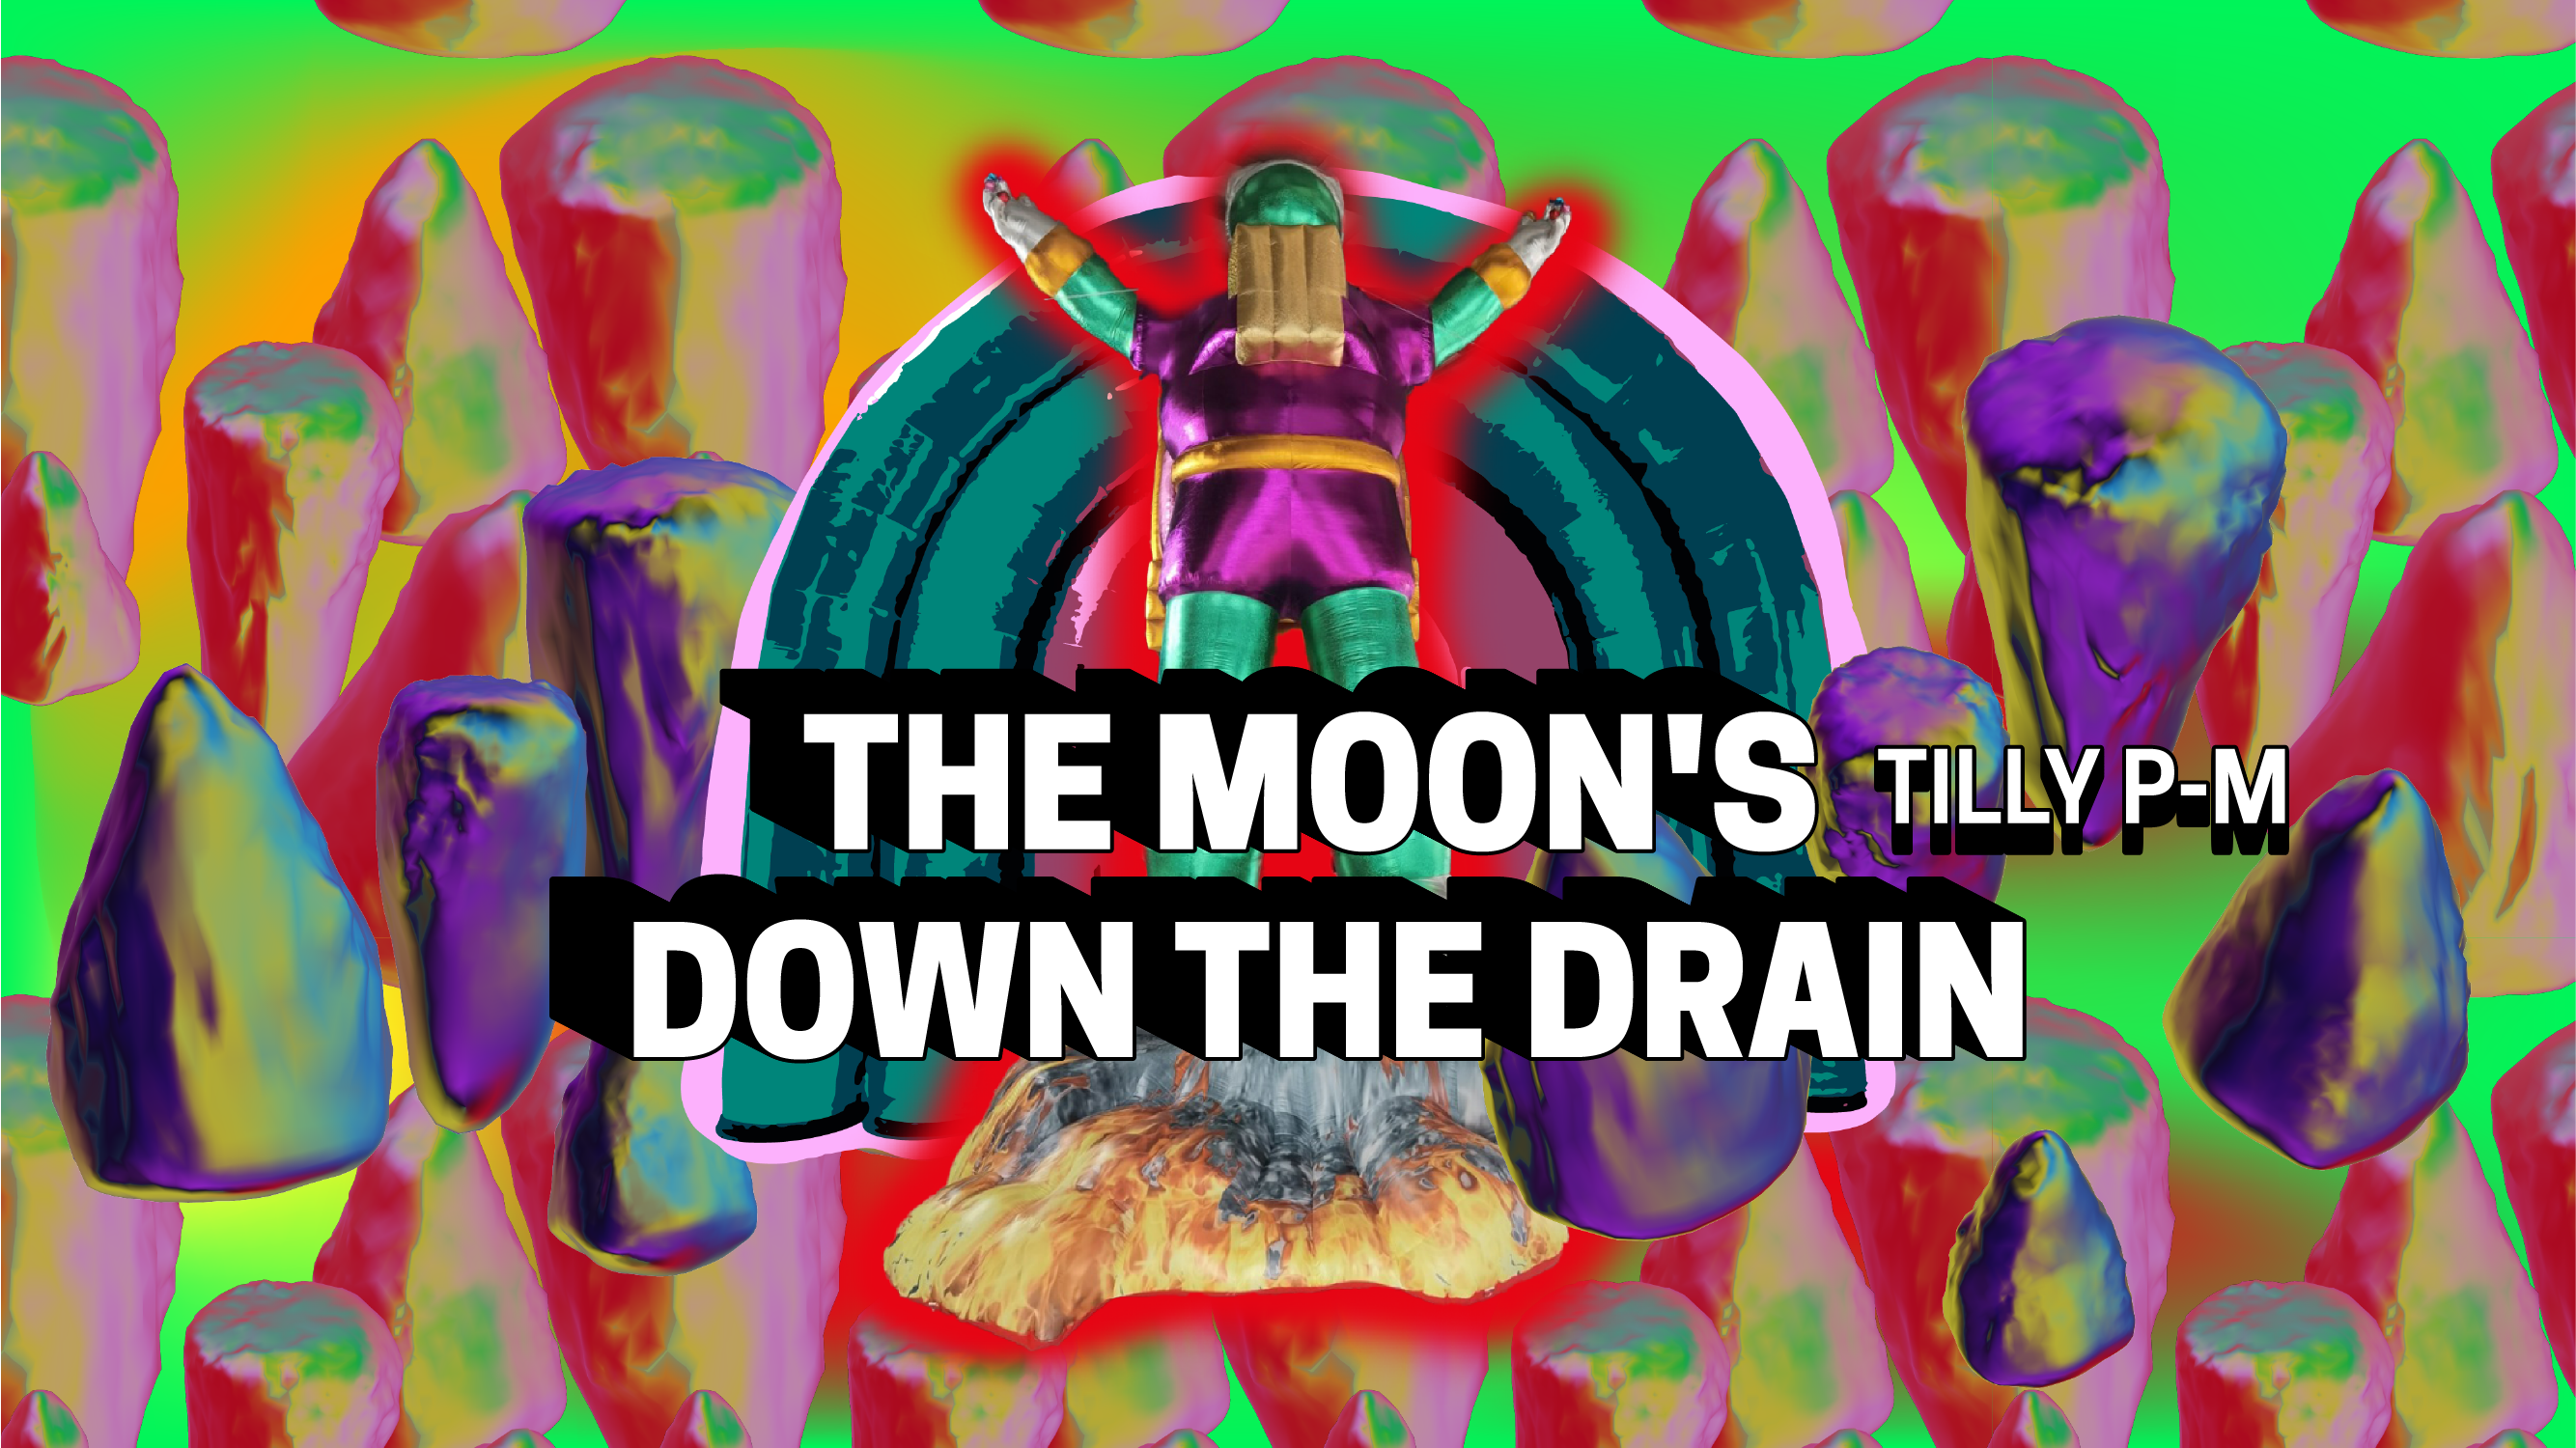 The moon's down the drain by Tilly P M